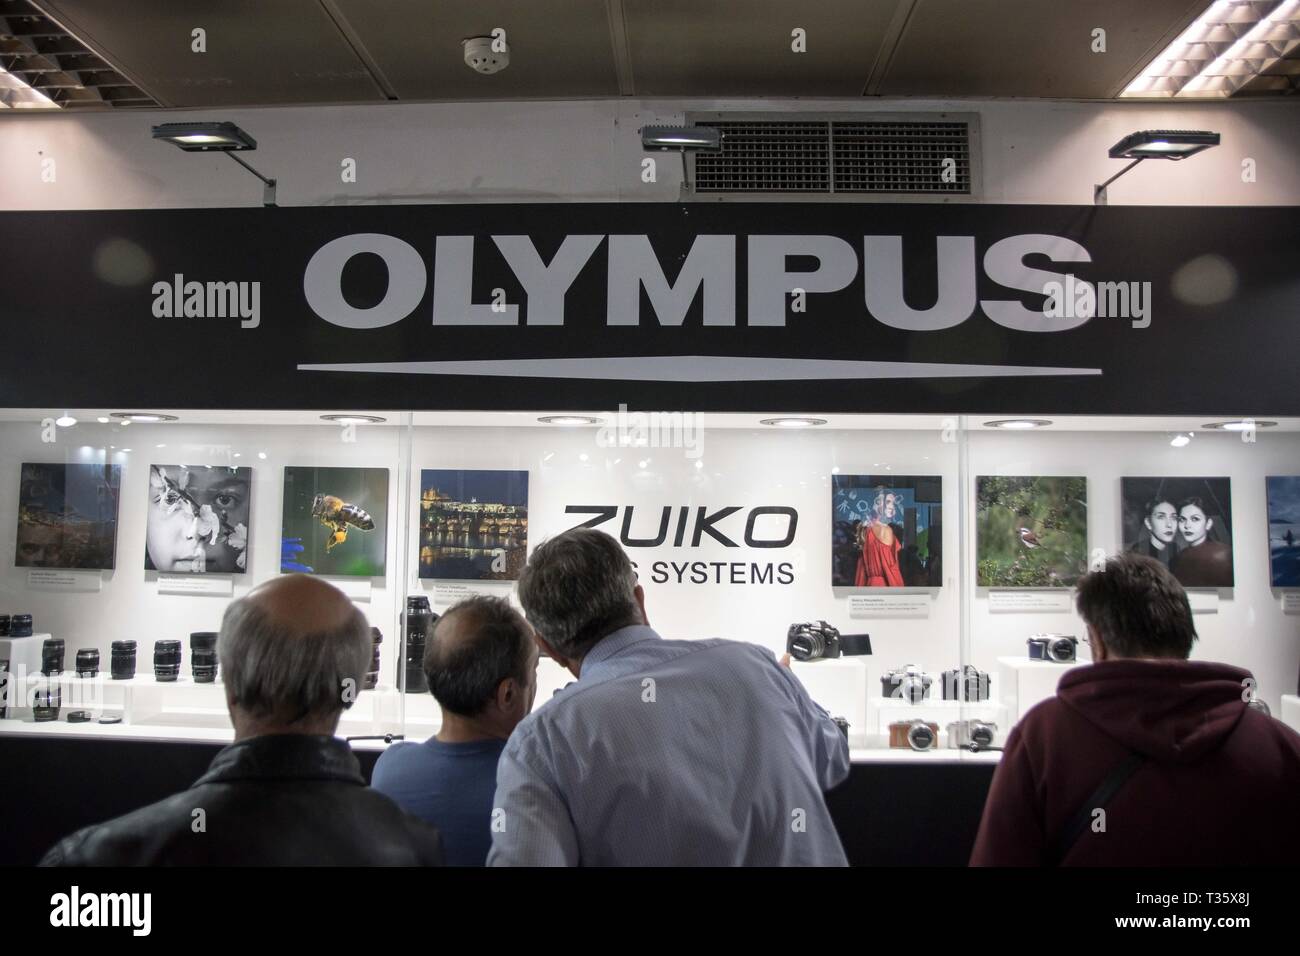 People are seen looking on at the Olympus new technologies systems during the festival. Image +Tech & Photo vision 2019 is a big festival with large corporate delegations, many exhibitions, stores and workshops about photography and video was held In the place of Helexpo Marousi in Athens, Greece. Stock Photo